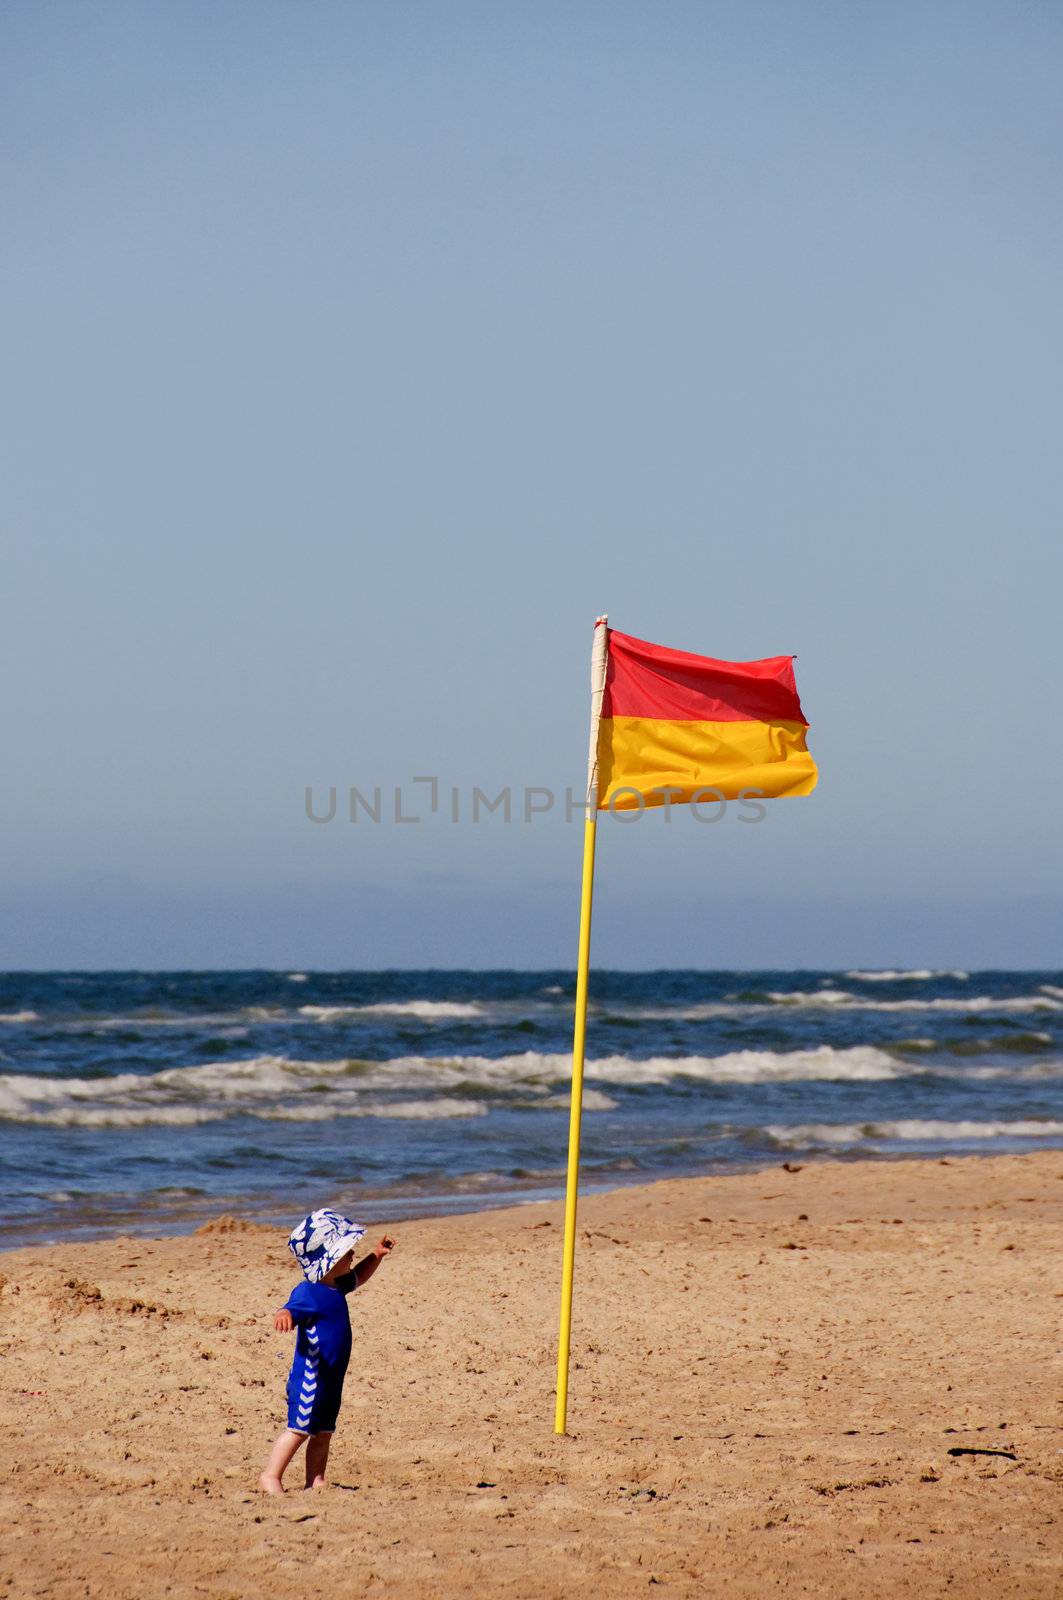 A small child pointing at the lifeguard flag